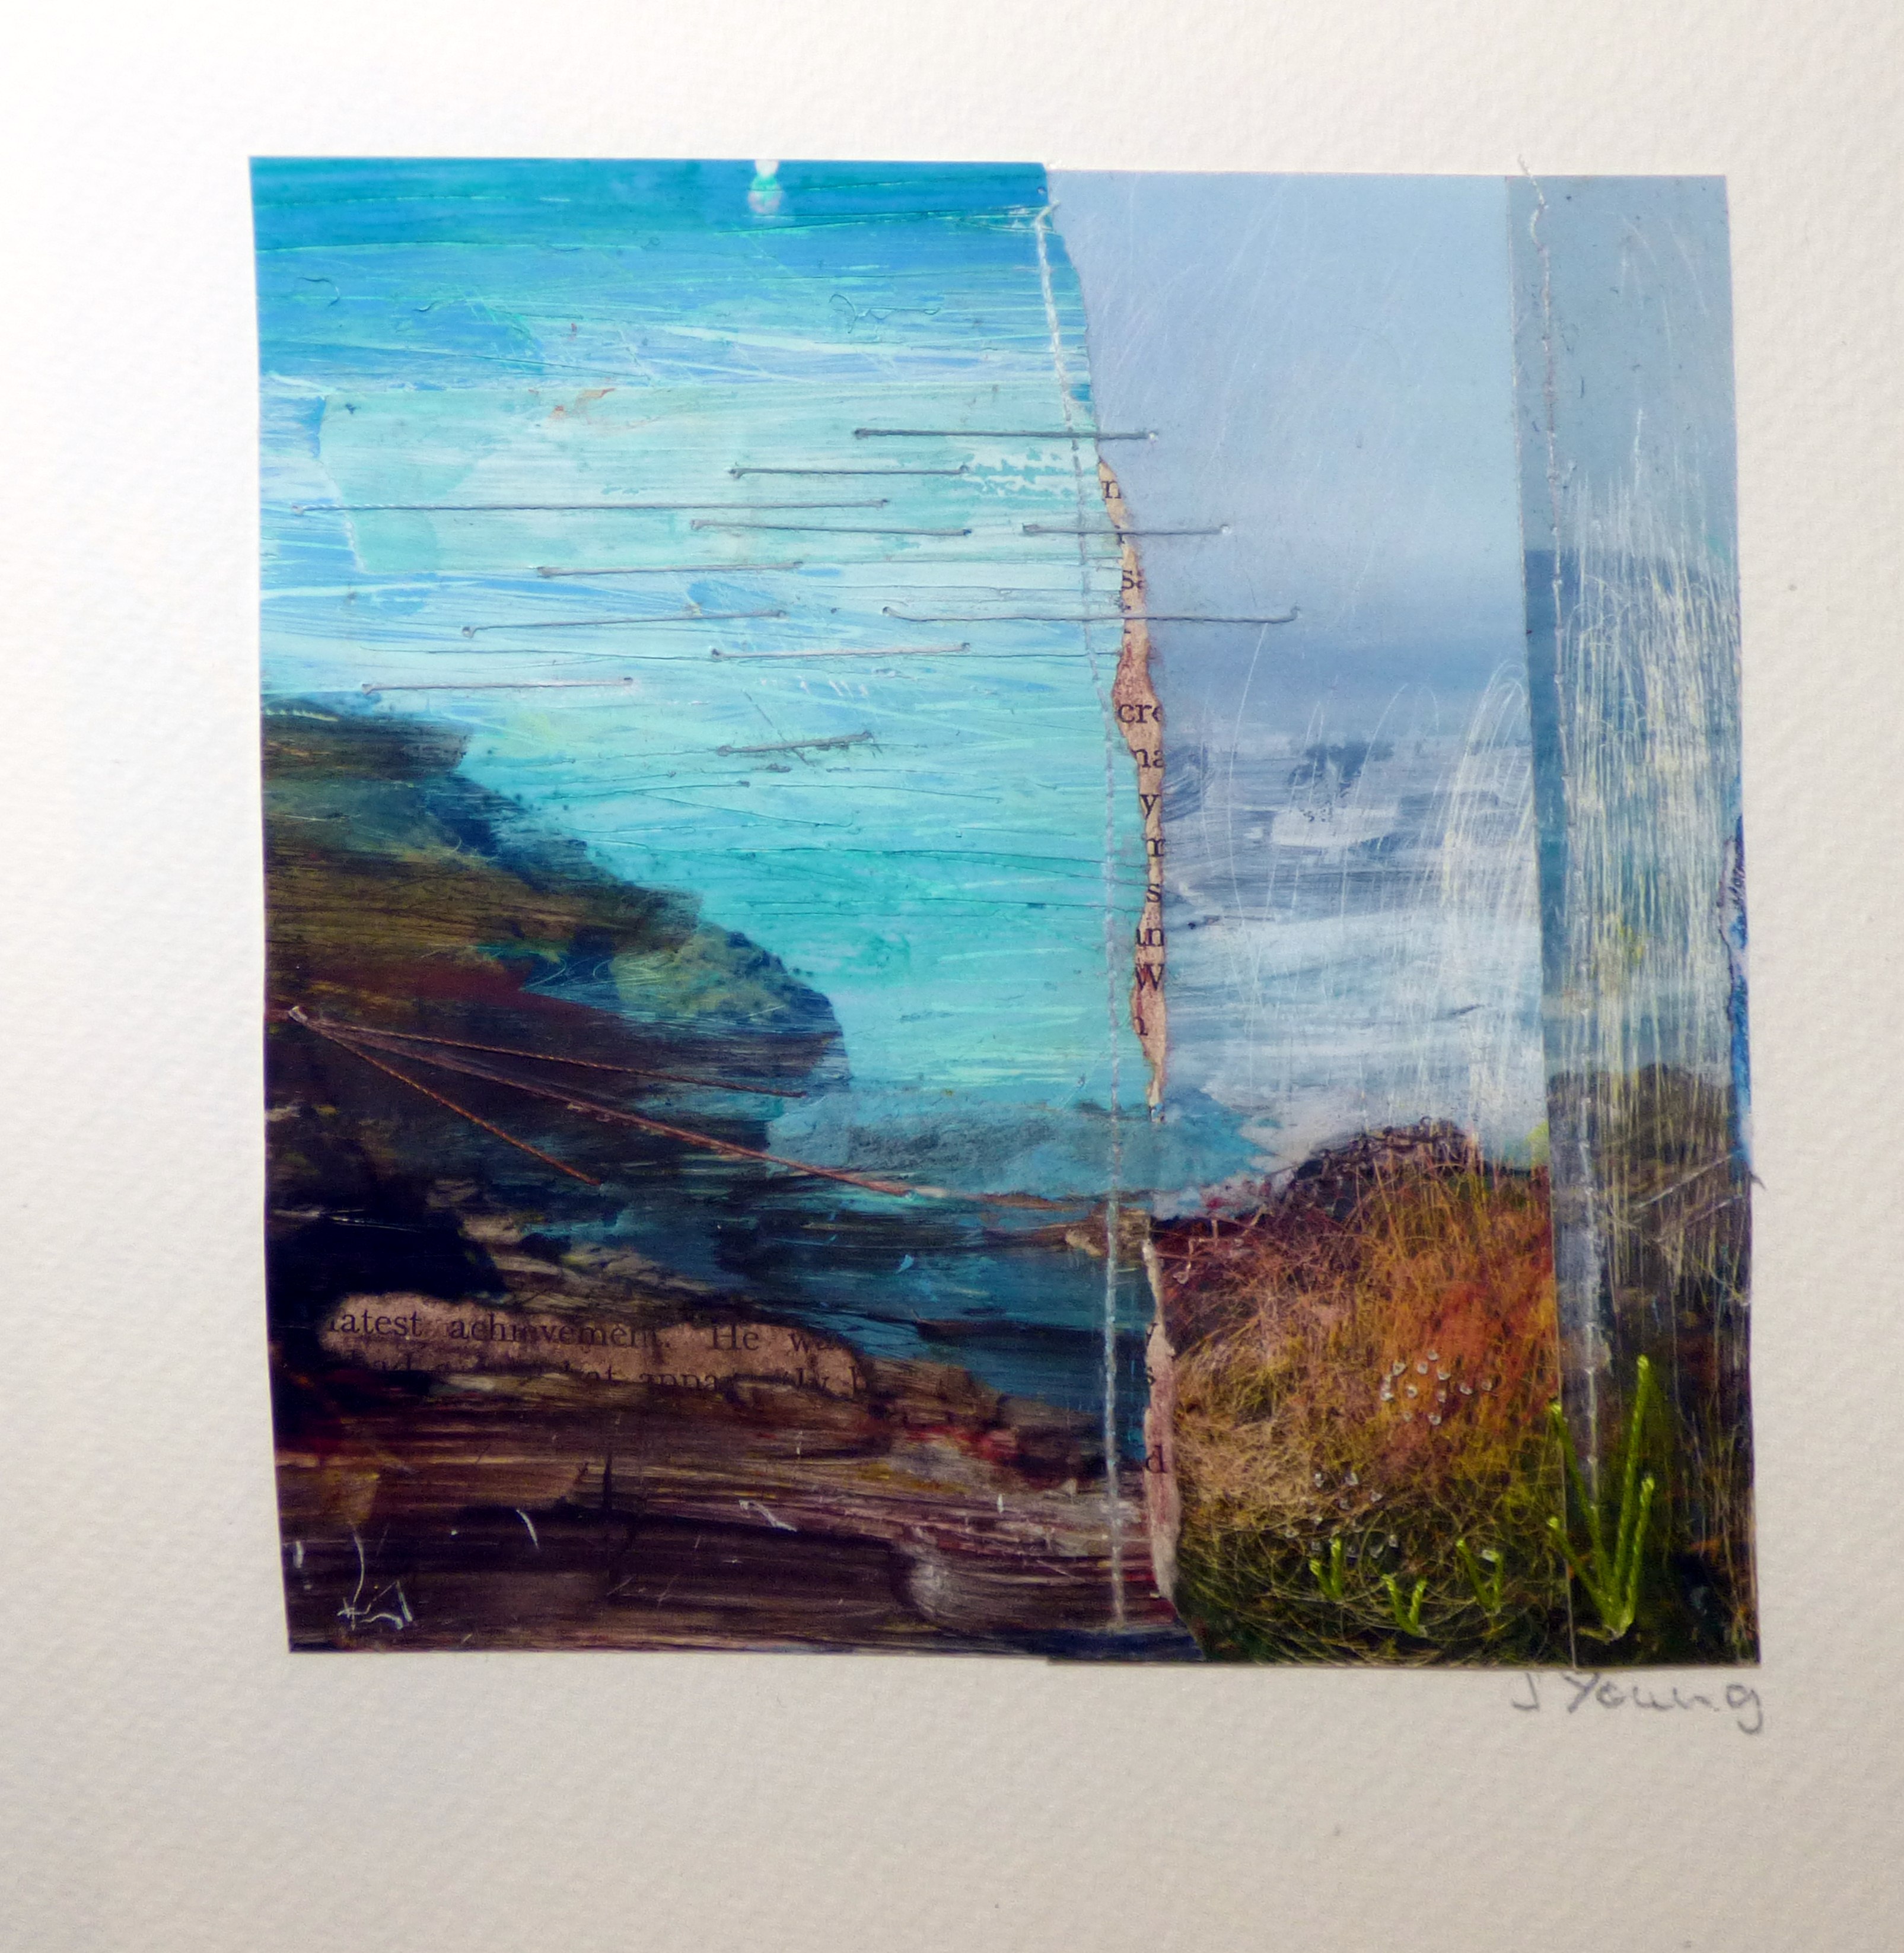 CORNISH COAST 3 by Joyce Young, altered photographs and stitch, ConText group 2018